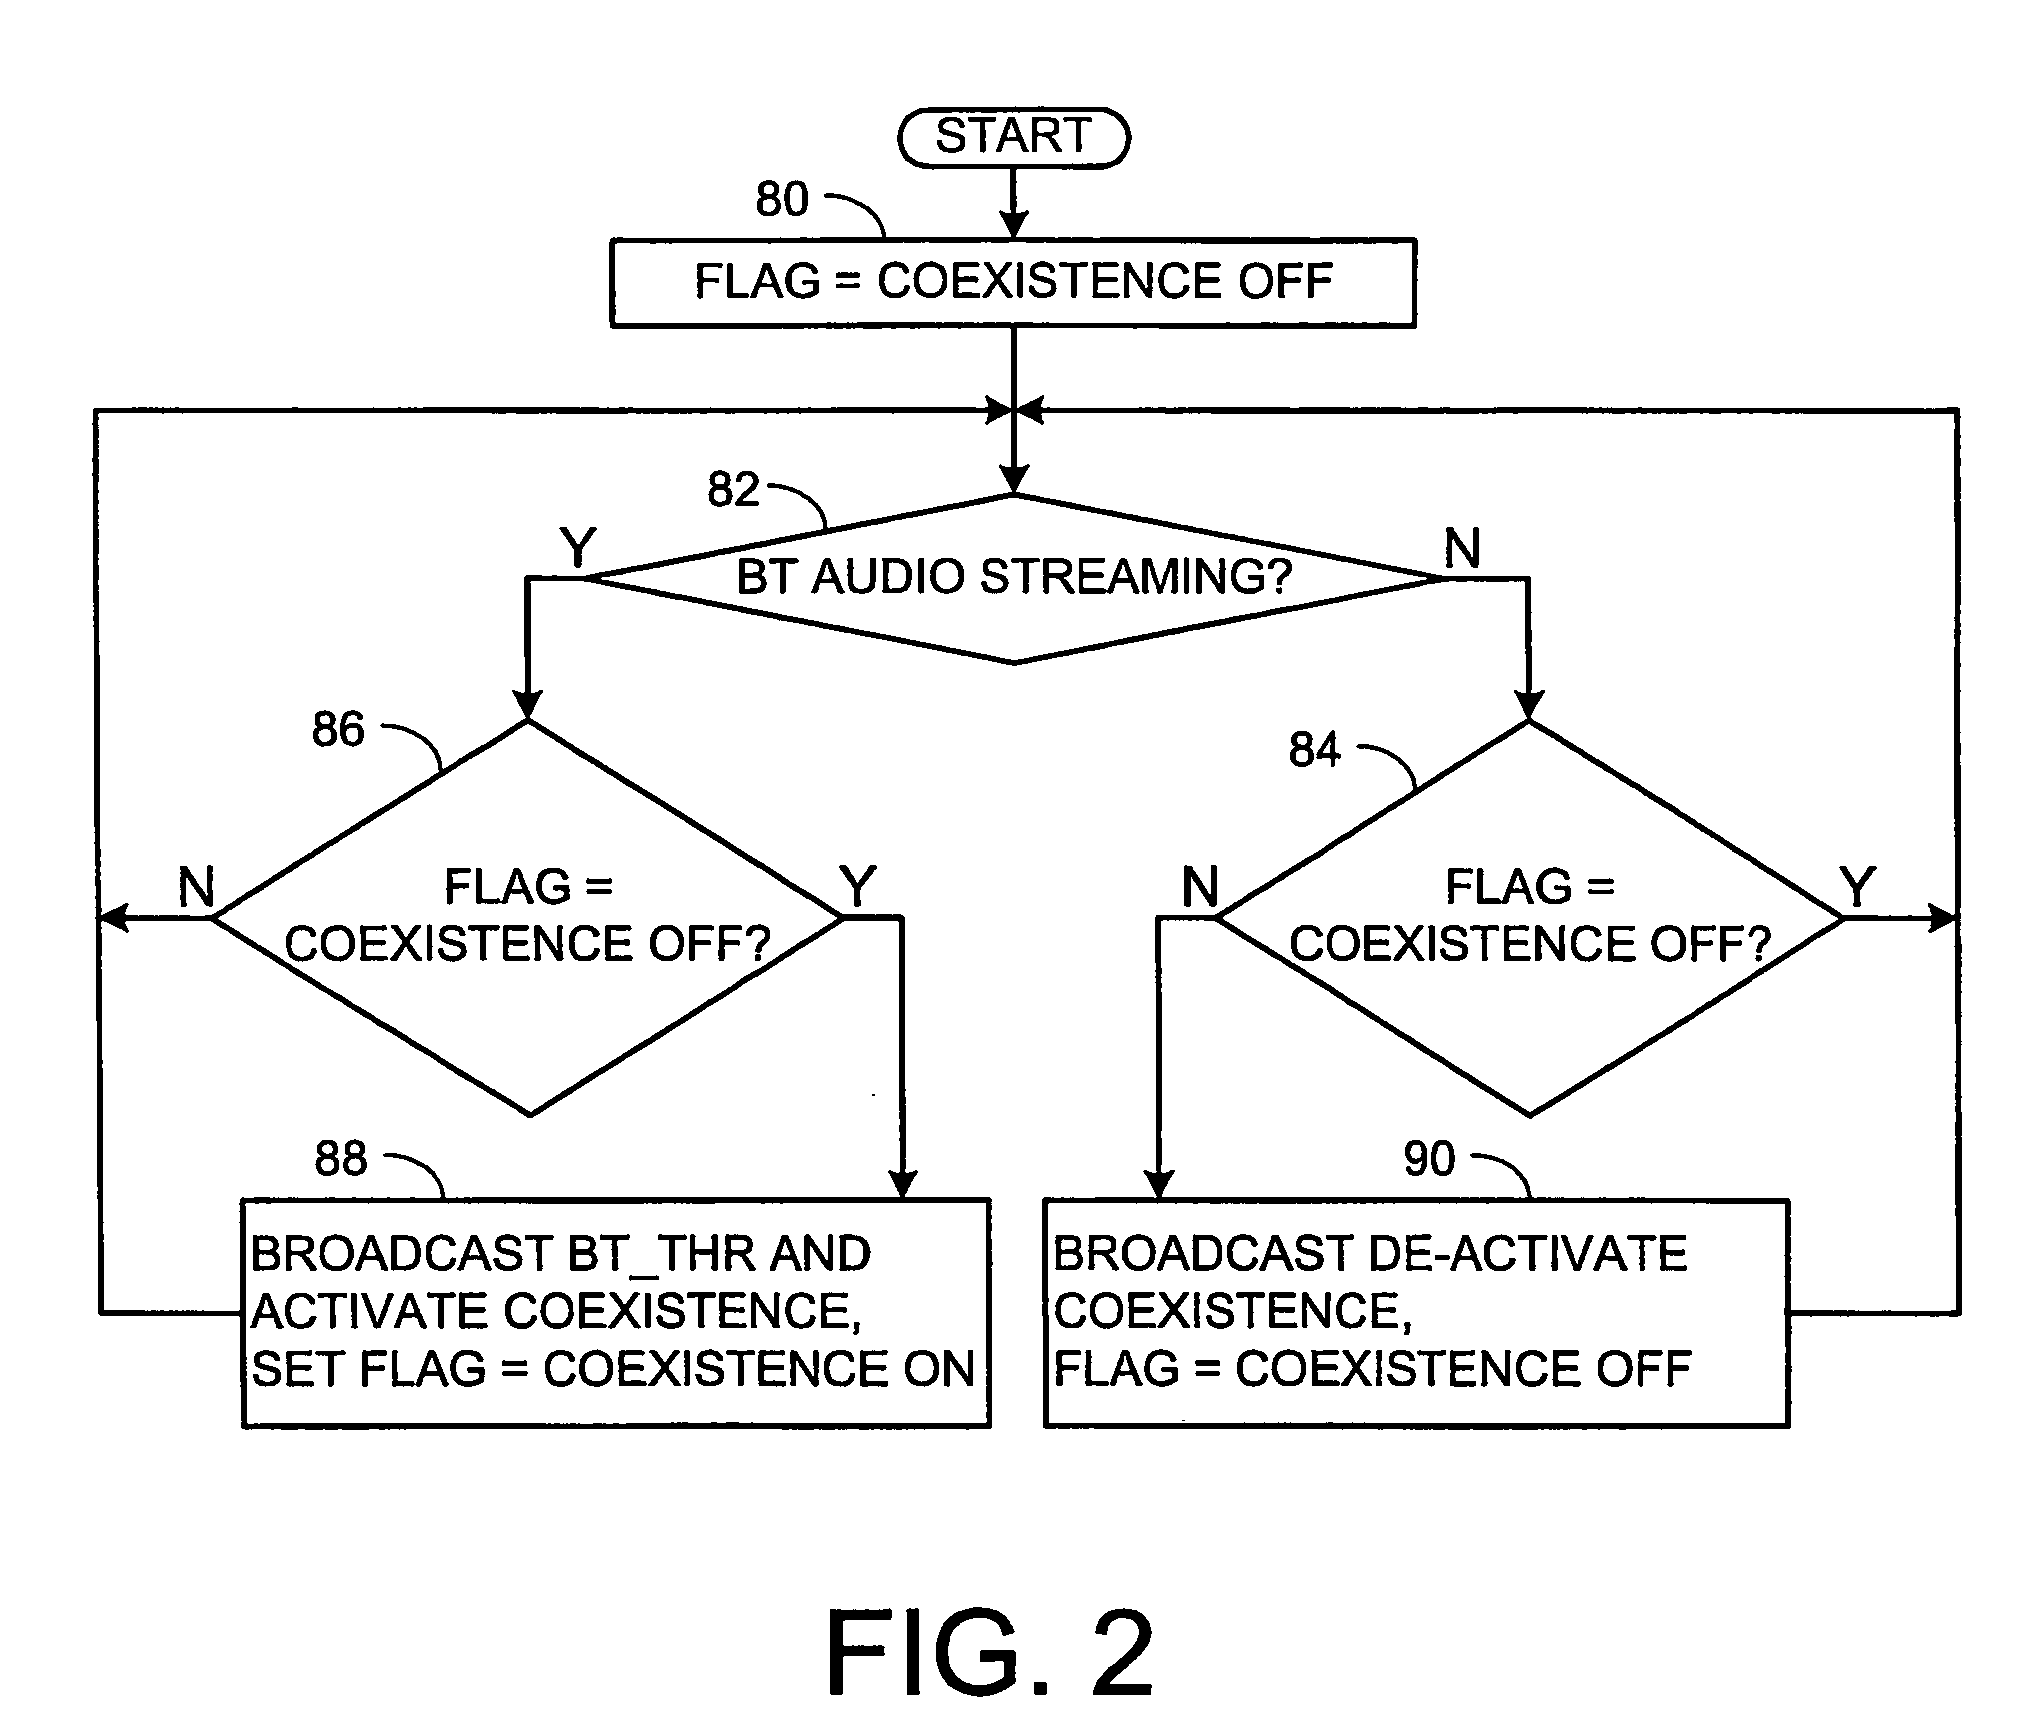 Apparatus and methods for coexistence of collocated wireless local area network and bluetooth based on dynamic fragmentation of WLAN packets